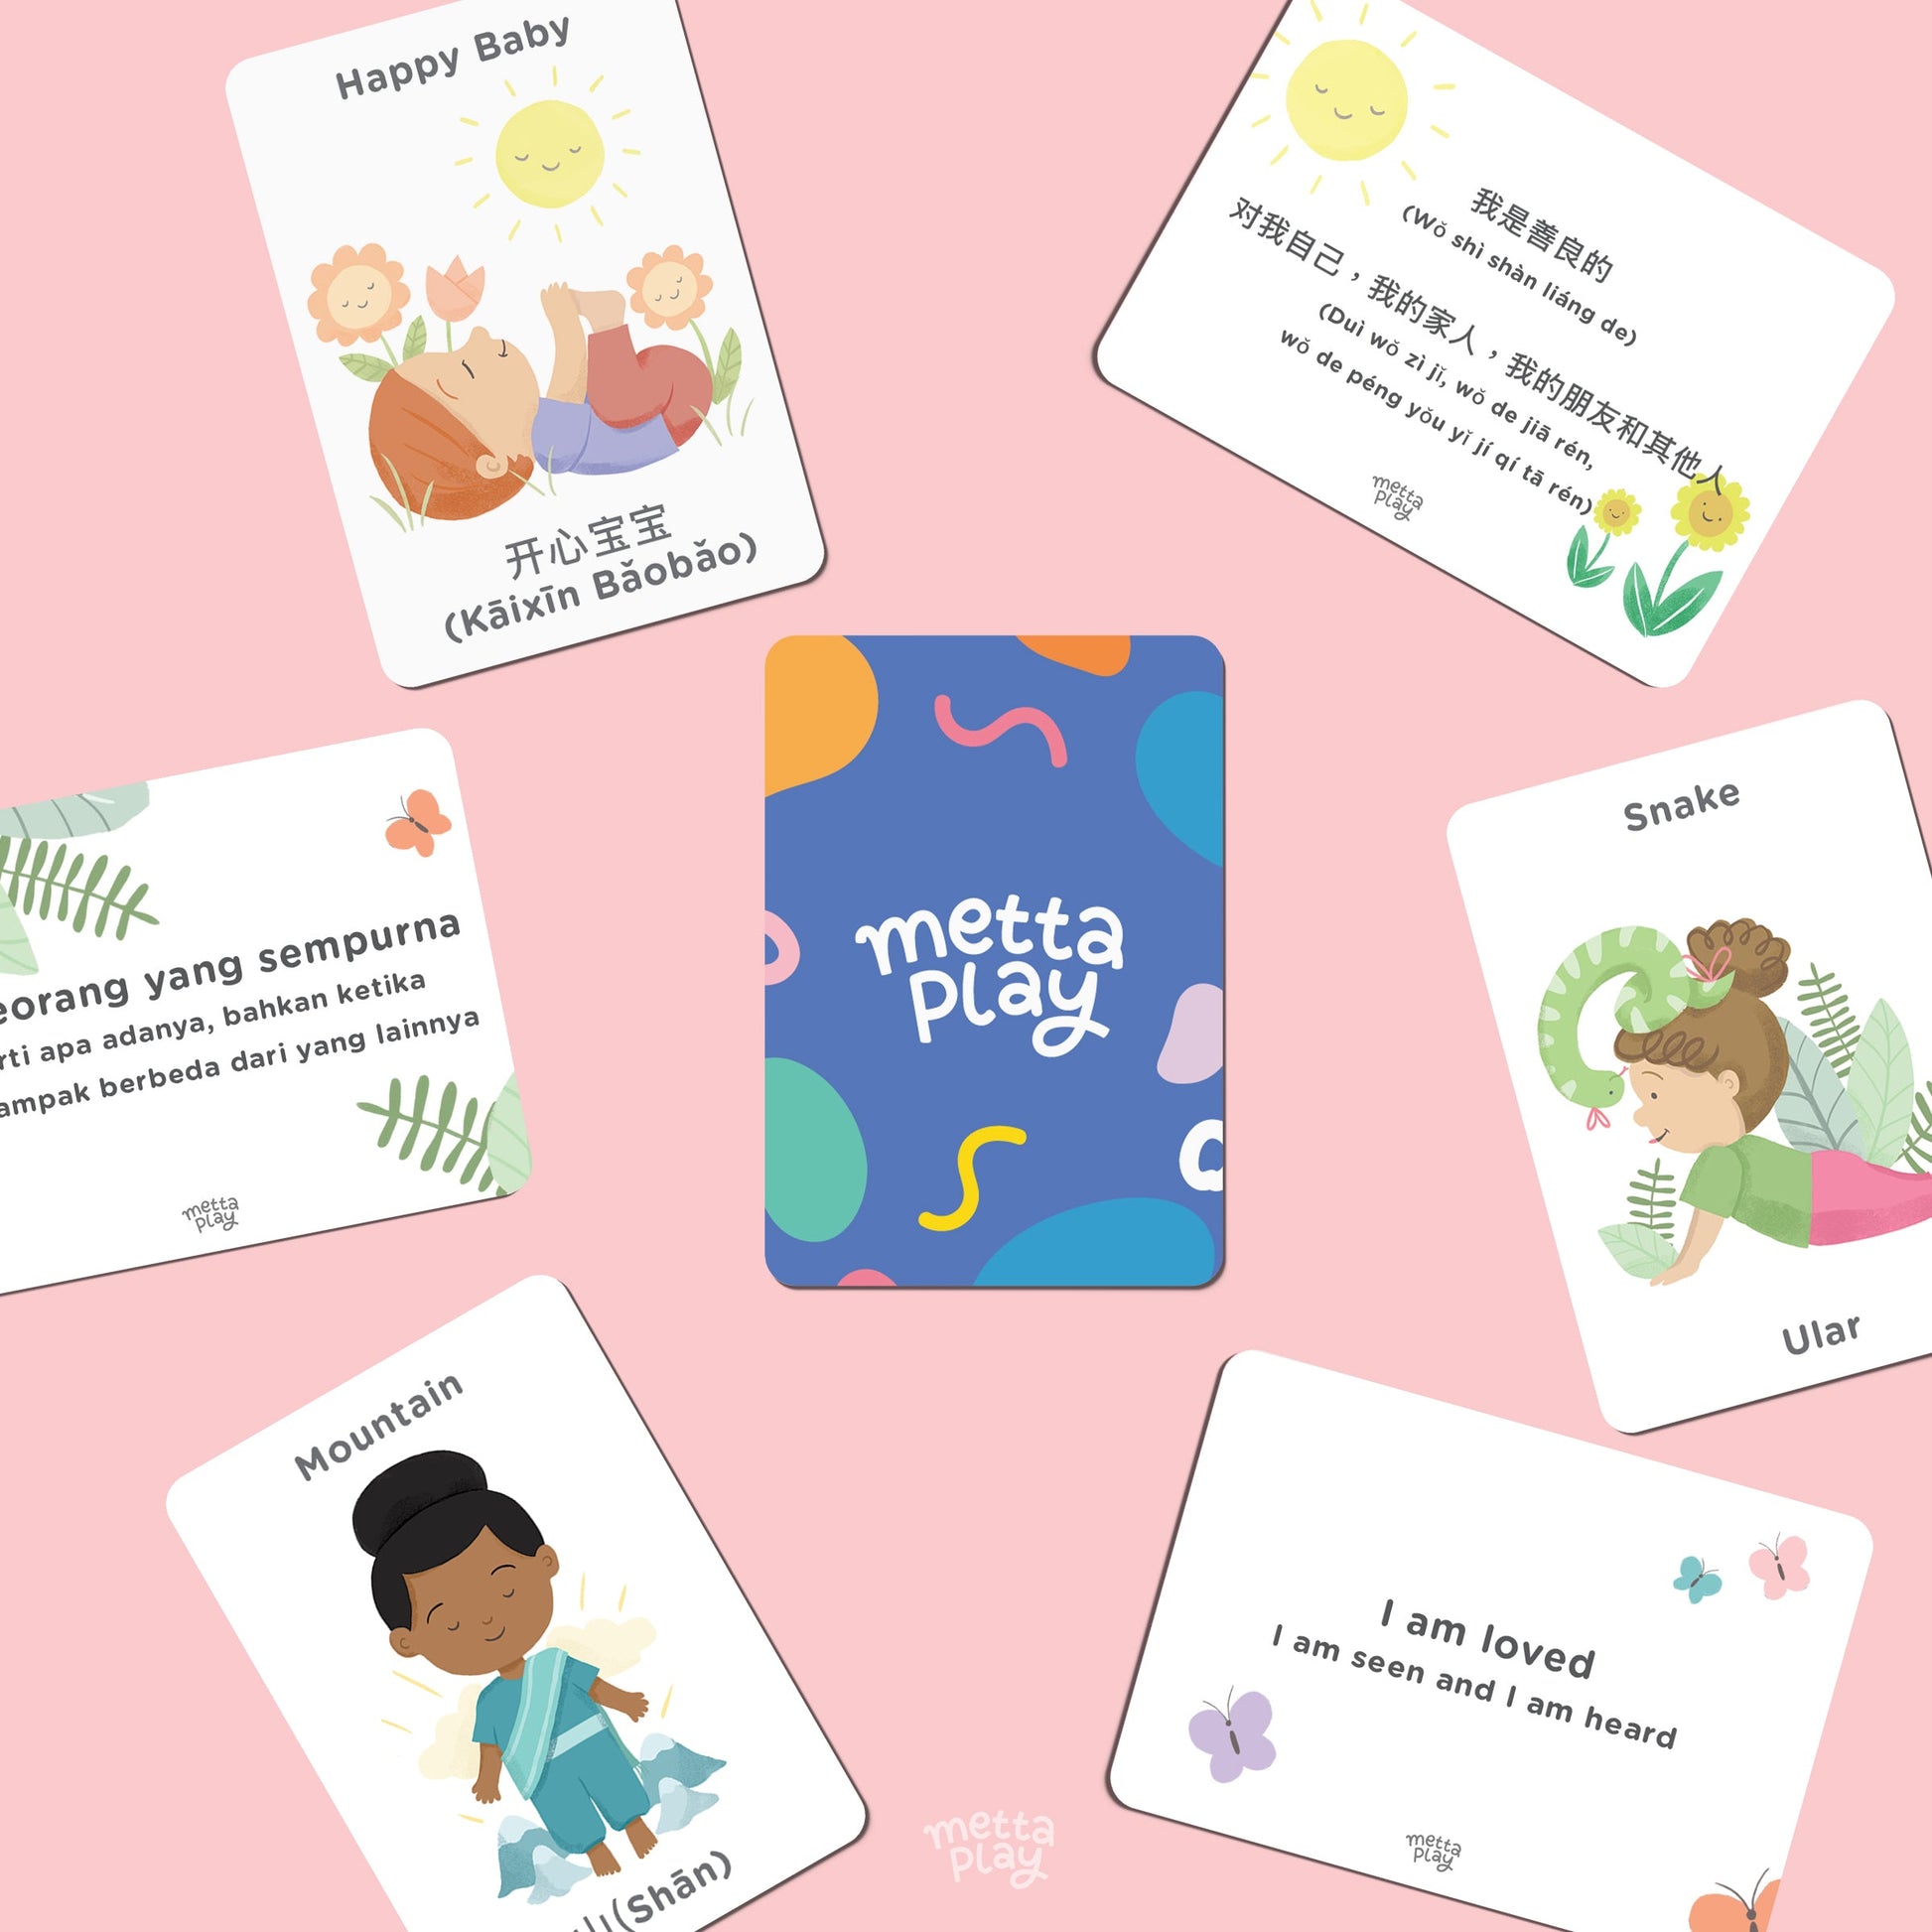 Give Mama a Break this Mother's Day - Metta Play Bilingual Cards